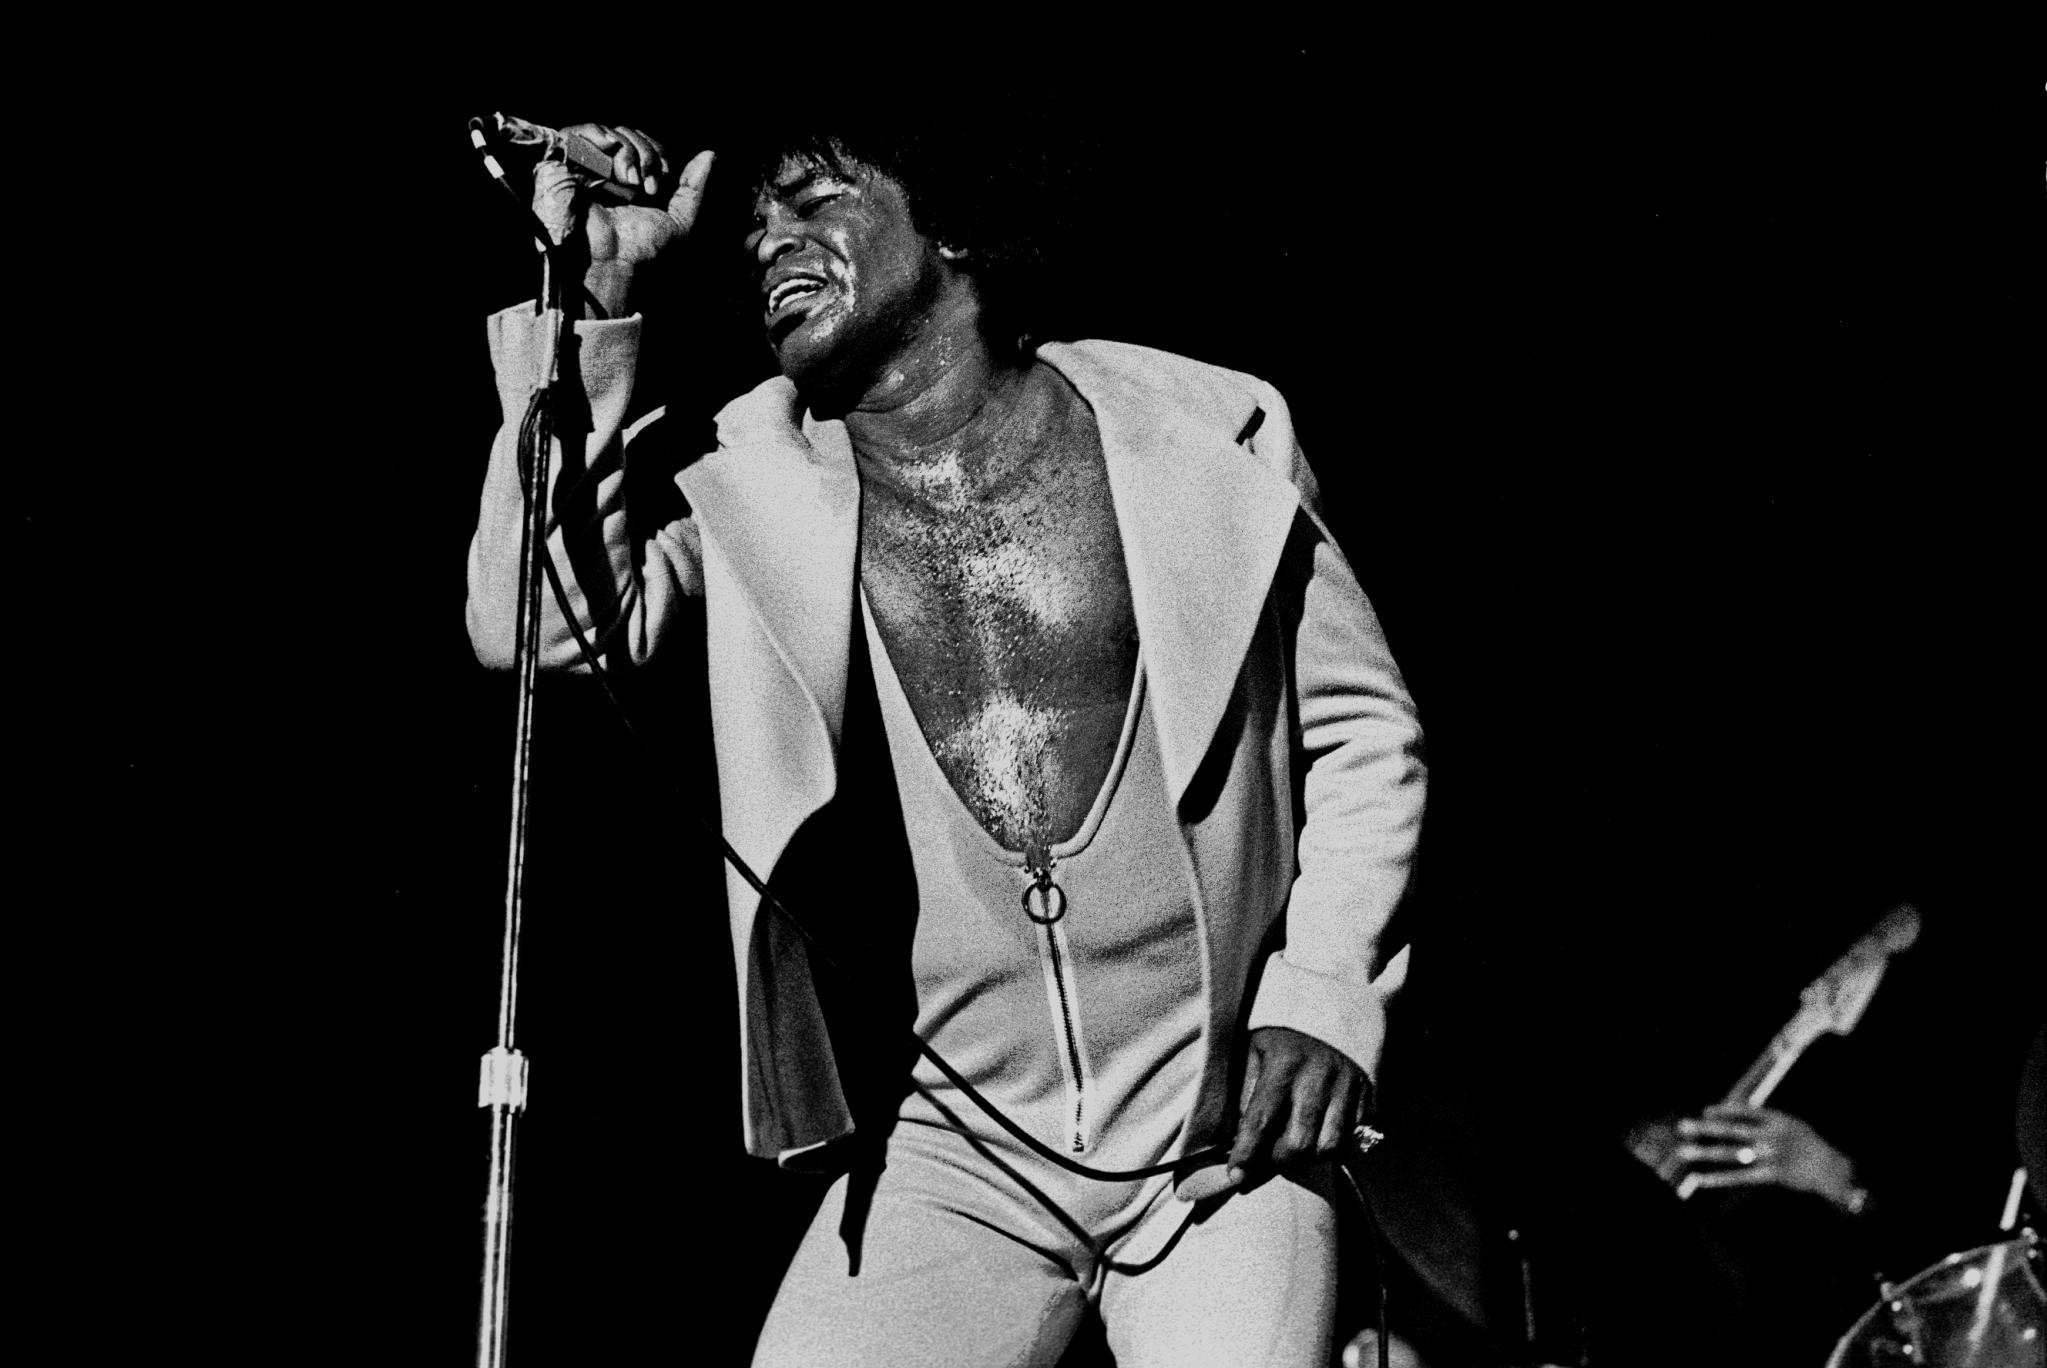 James Brown Out Danced on Soul Train